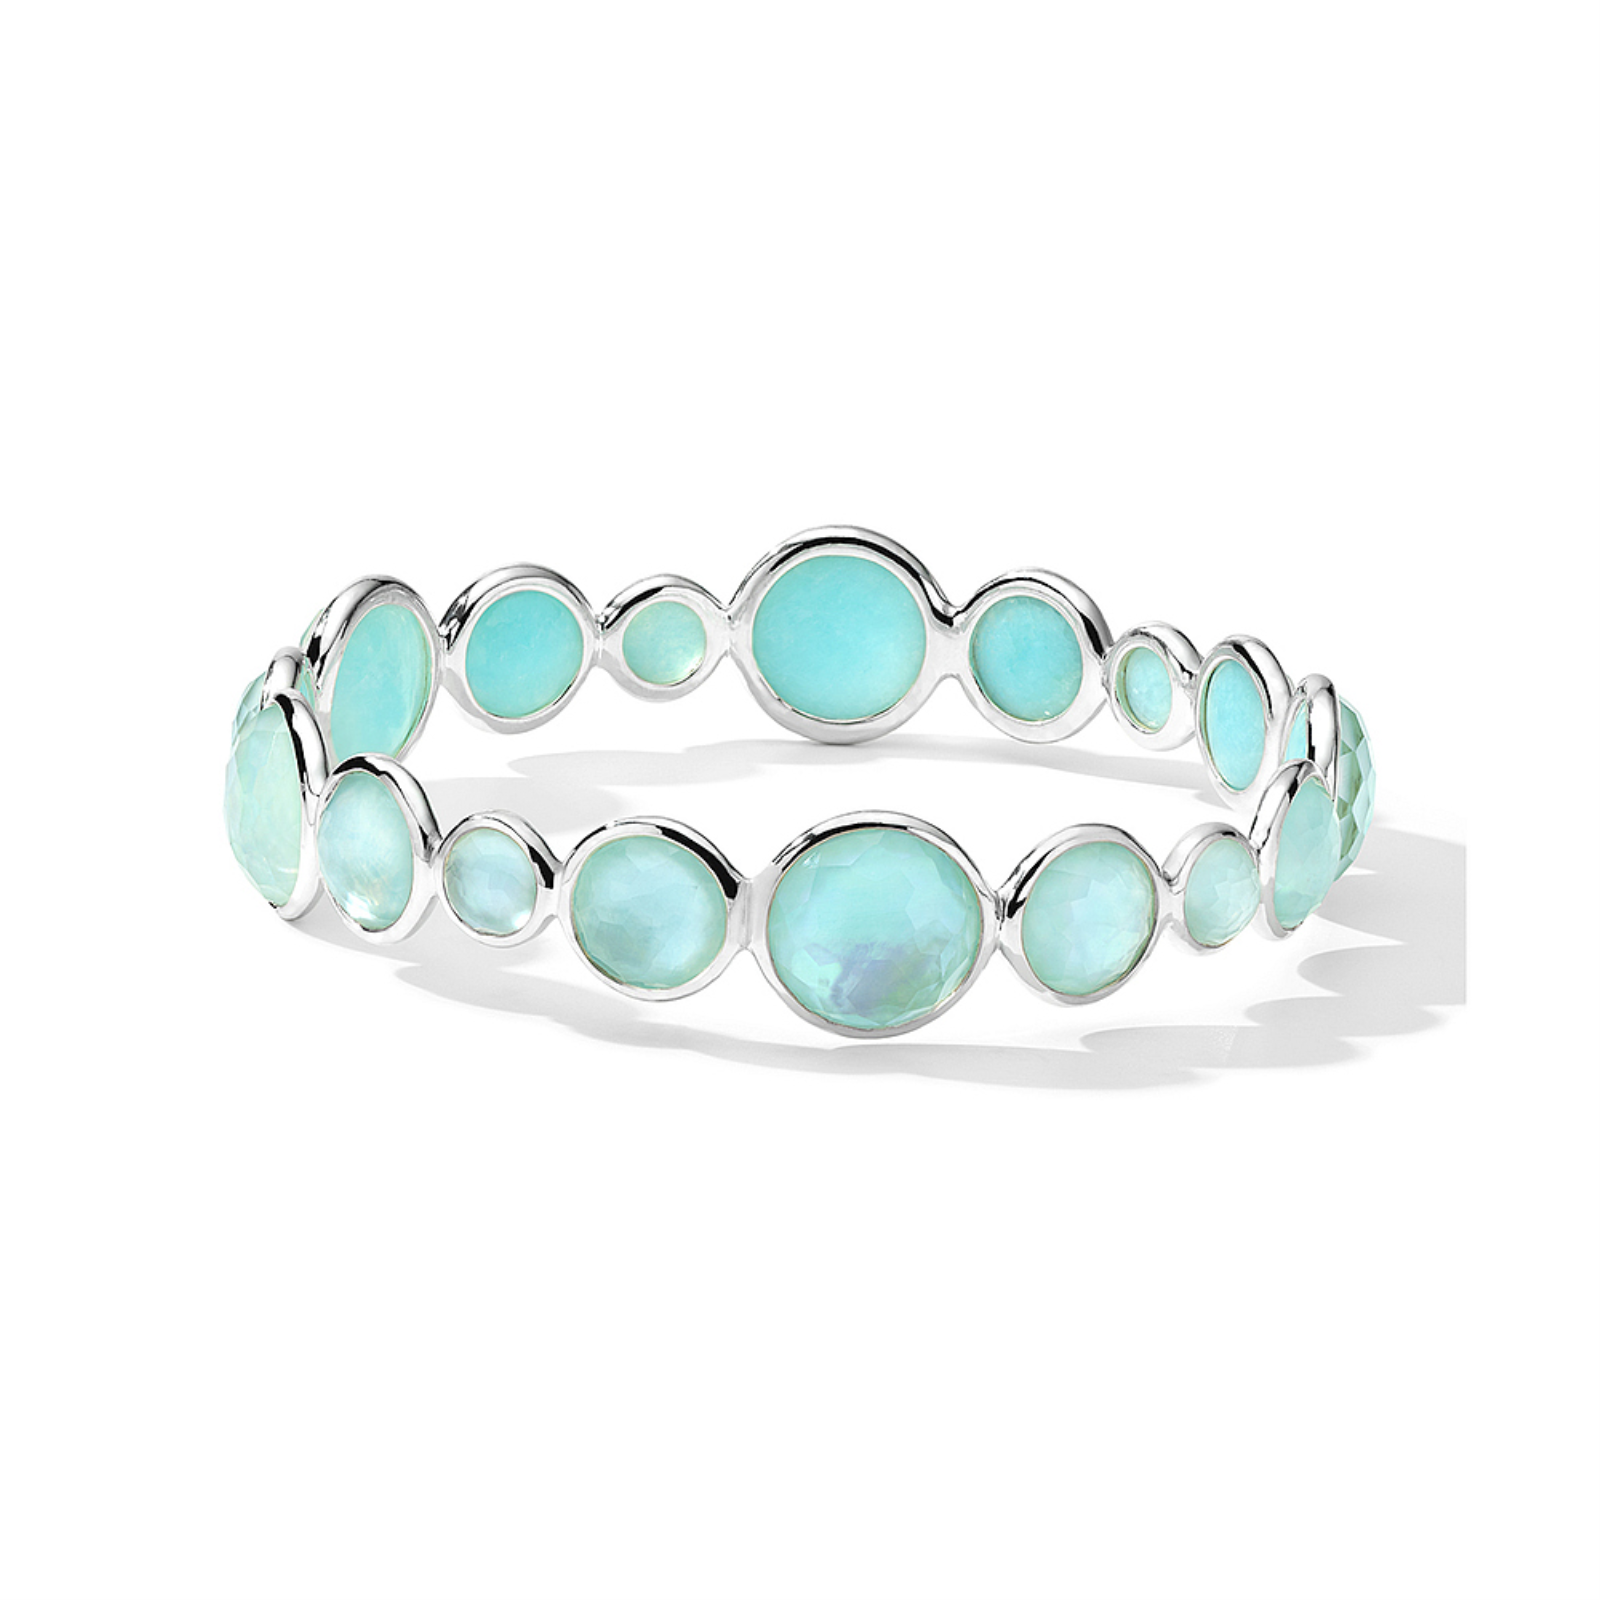 Sterling Silver Bangle Bracelet with Rock Crystal, Mother-of-Pearl and Amazonite Triplet